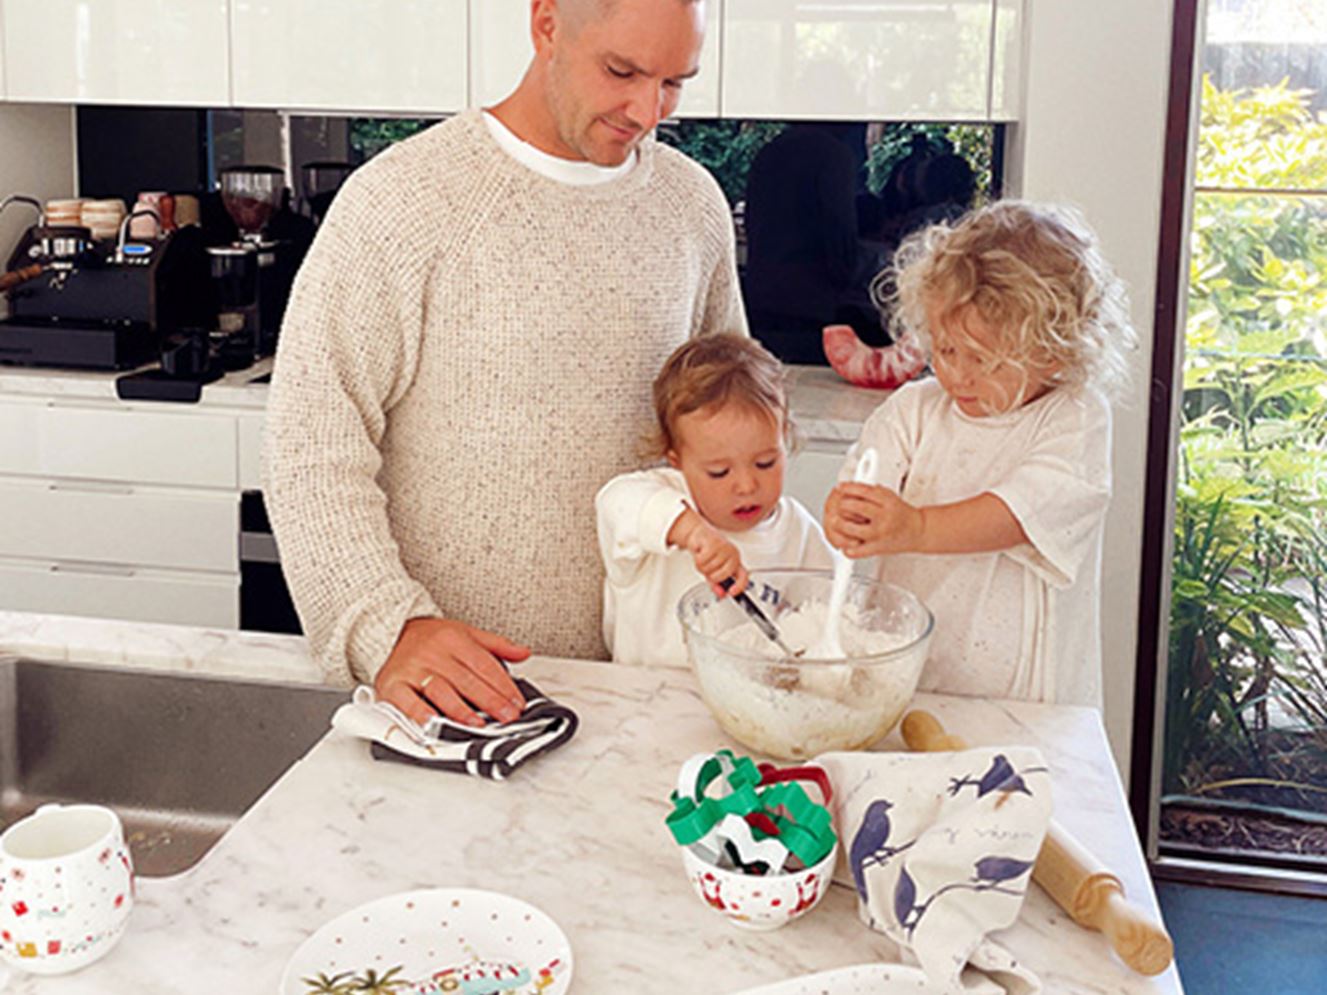 Father with two young children baking Christmas gingerbread cookies at kitchen bench.